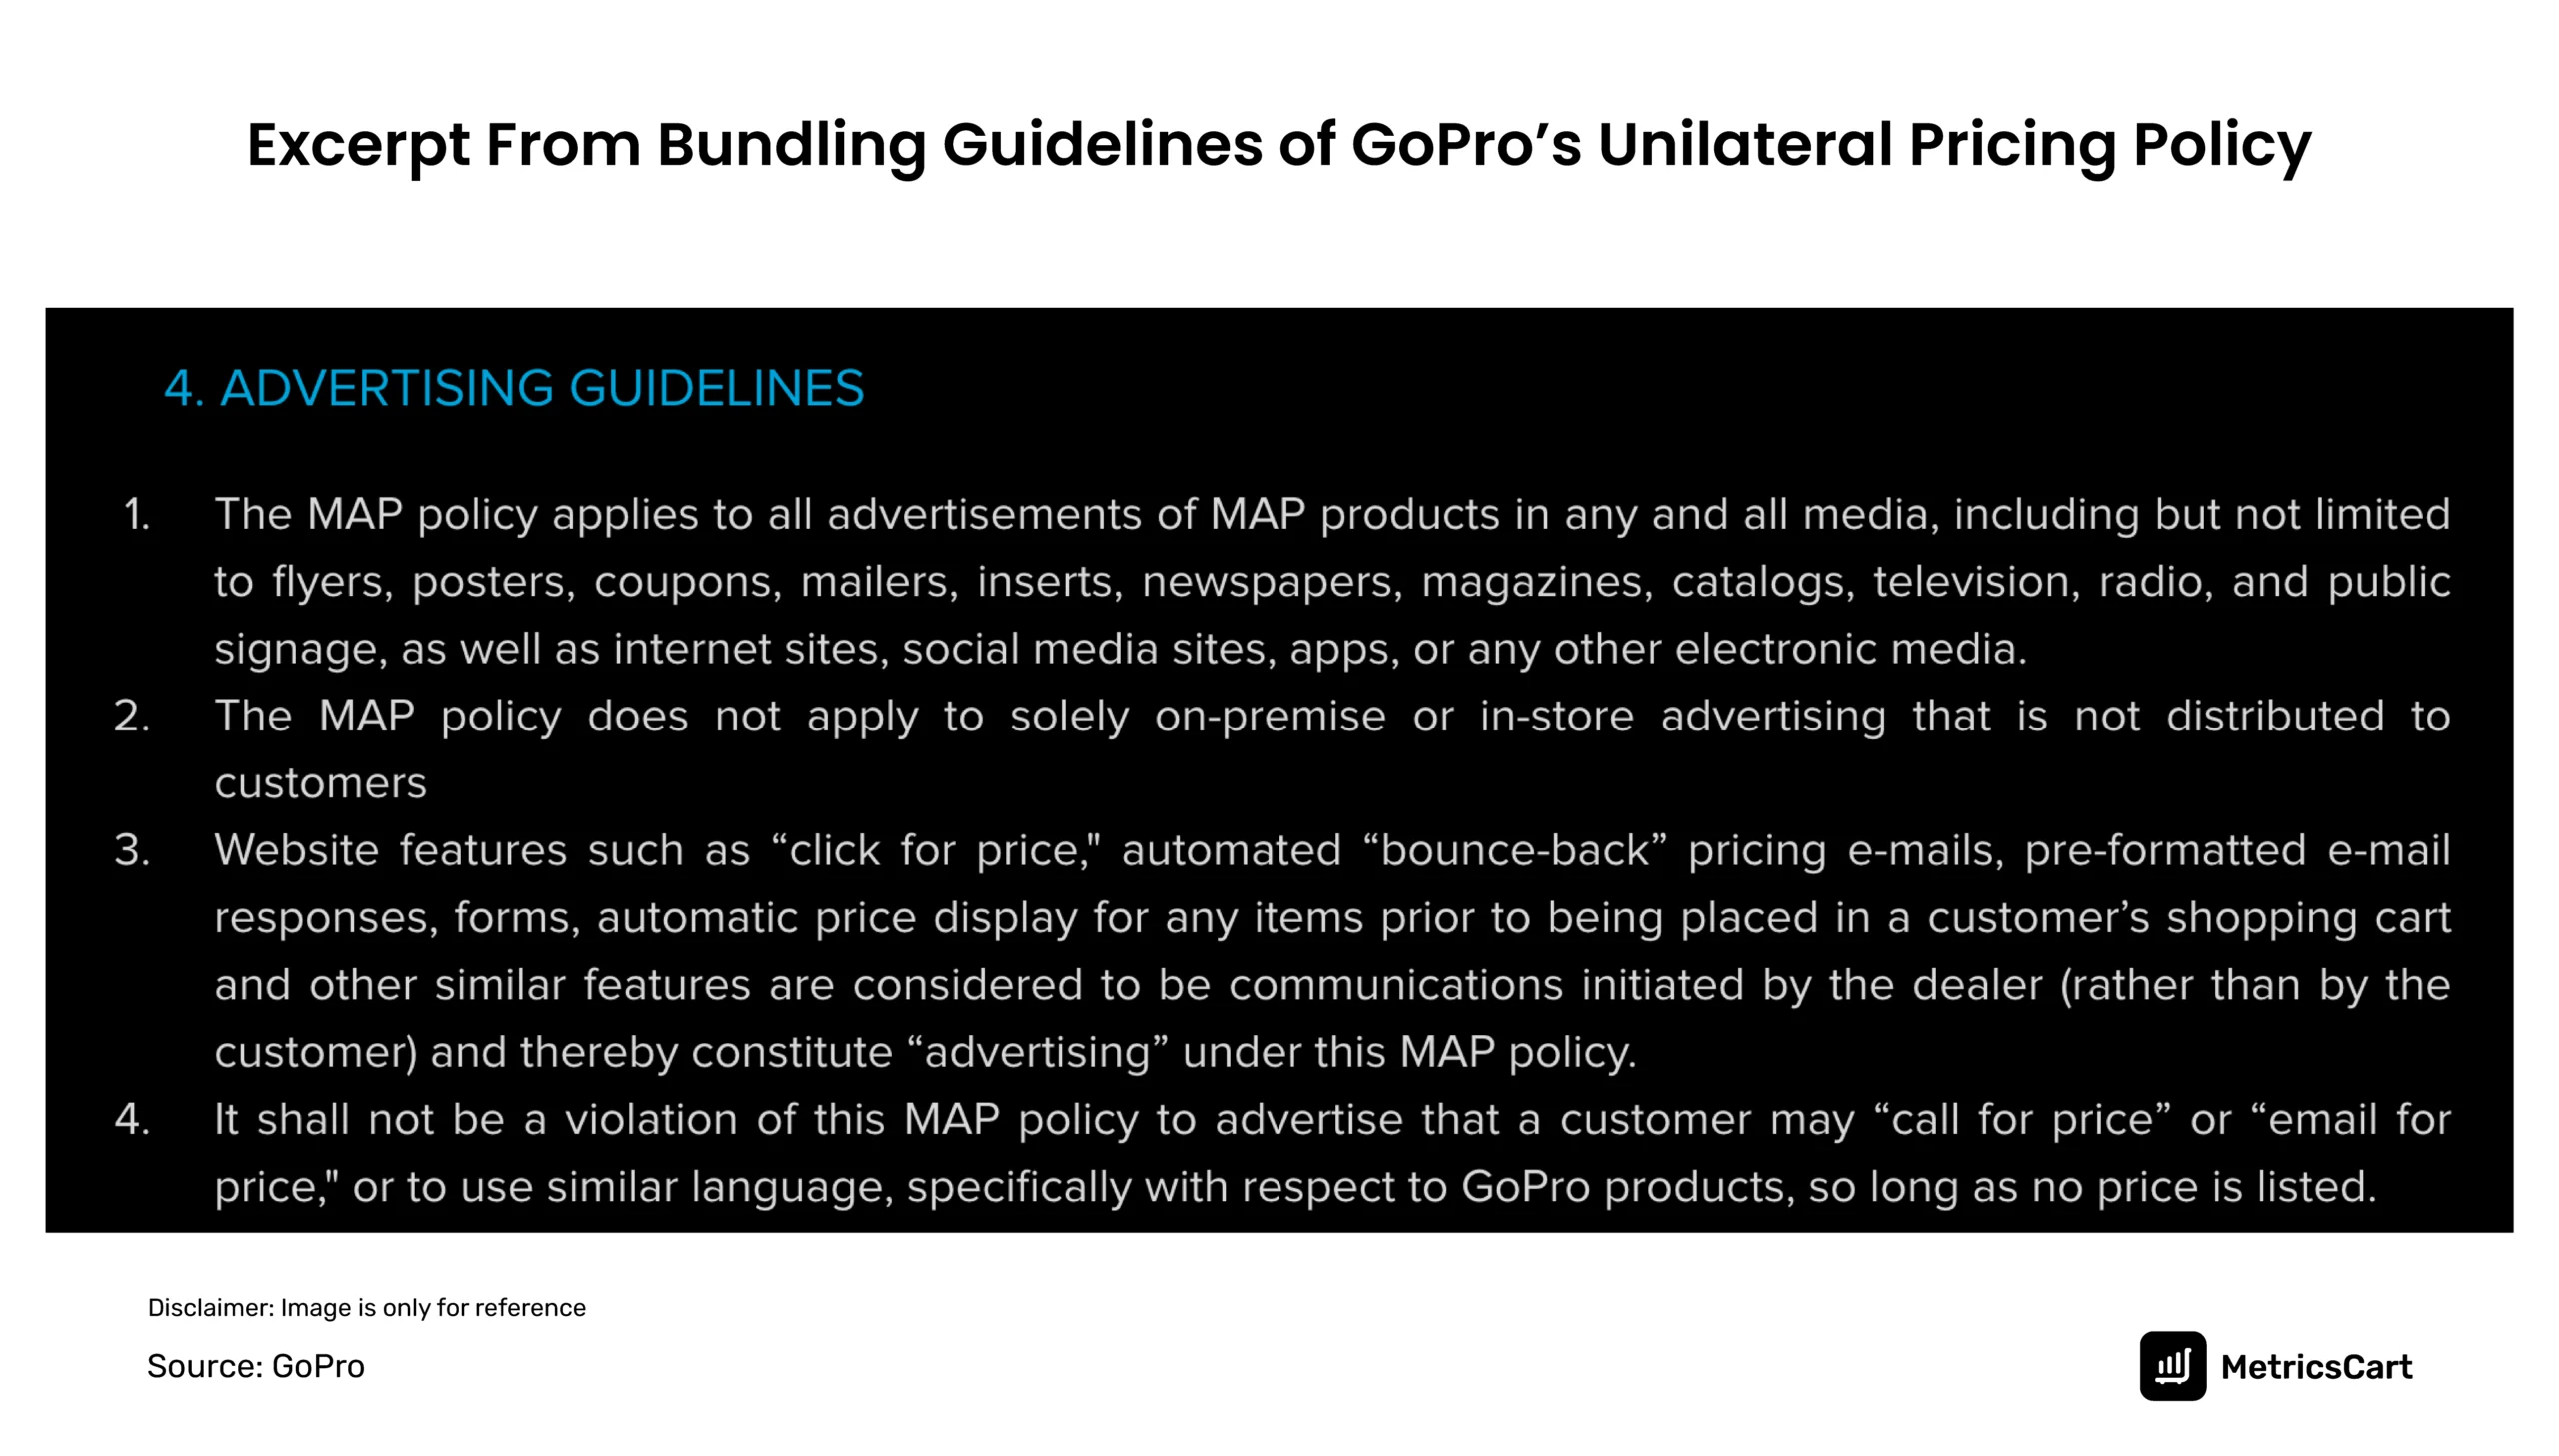 A screenshot of the bundling guidelines in the UPP policy of GoPro 